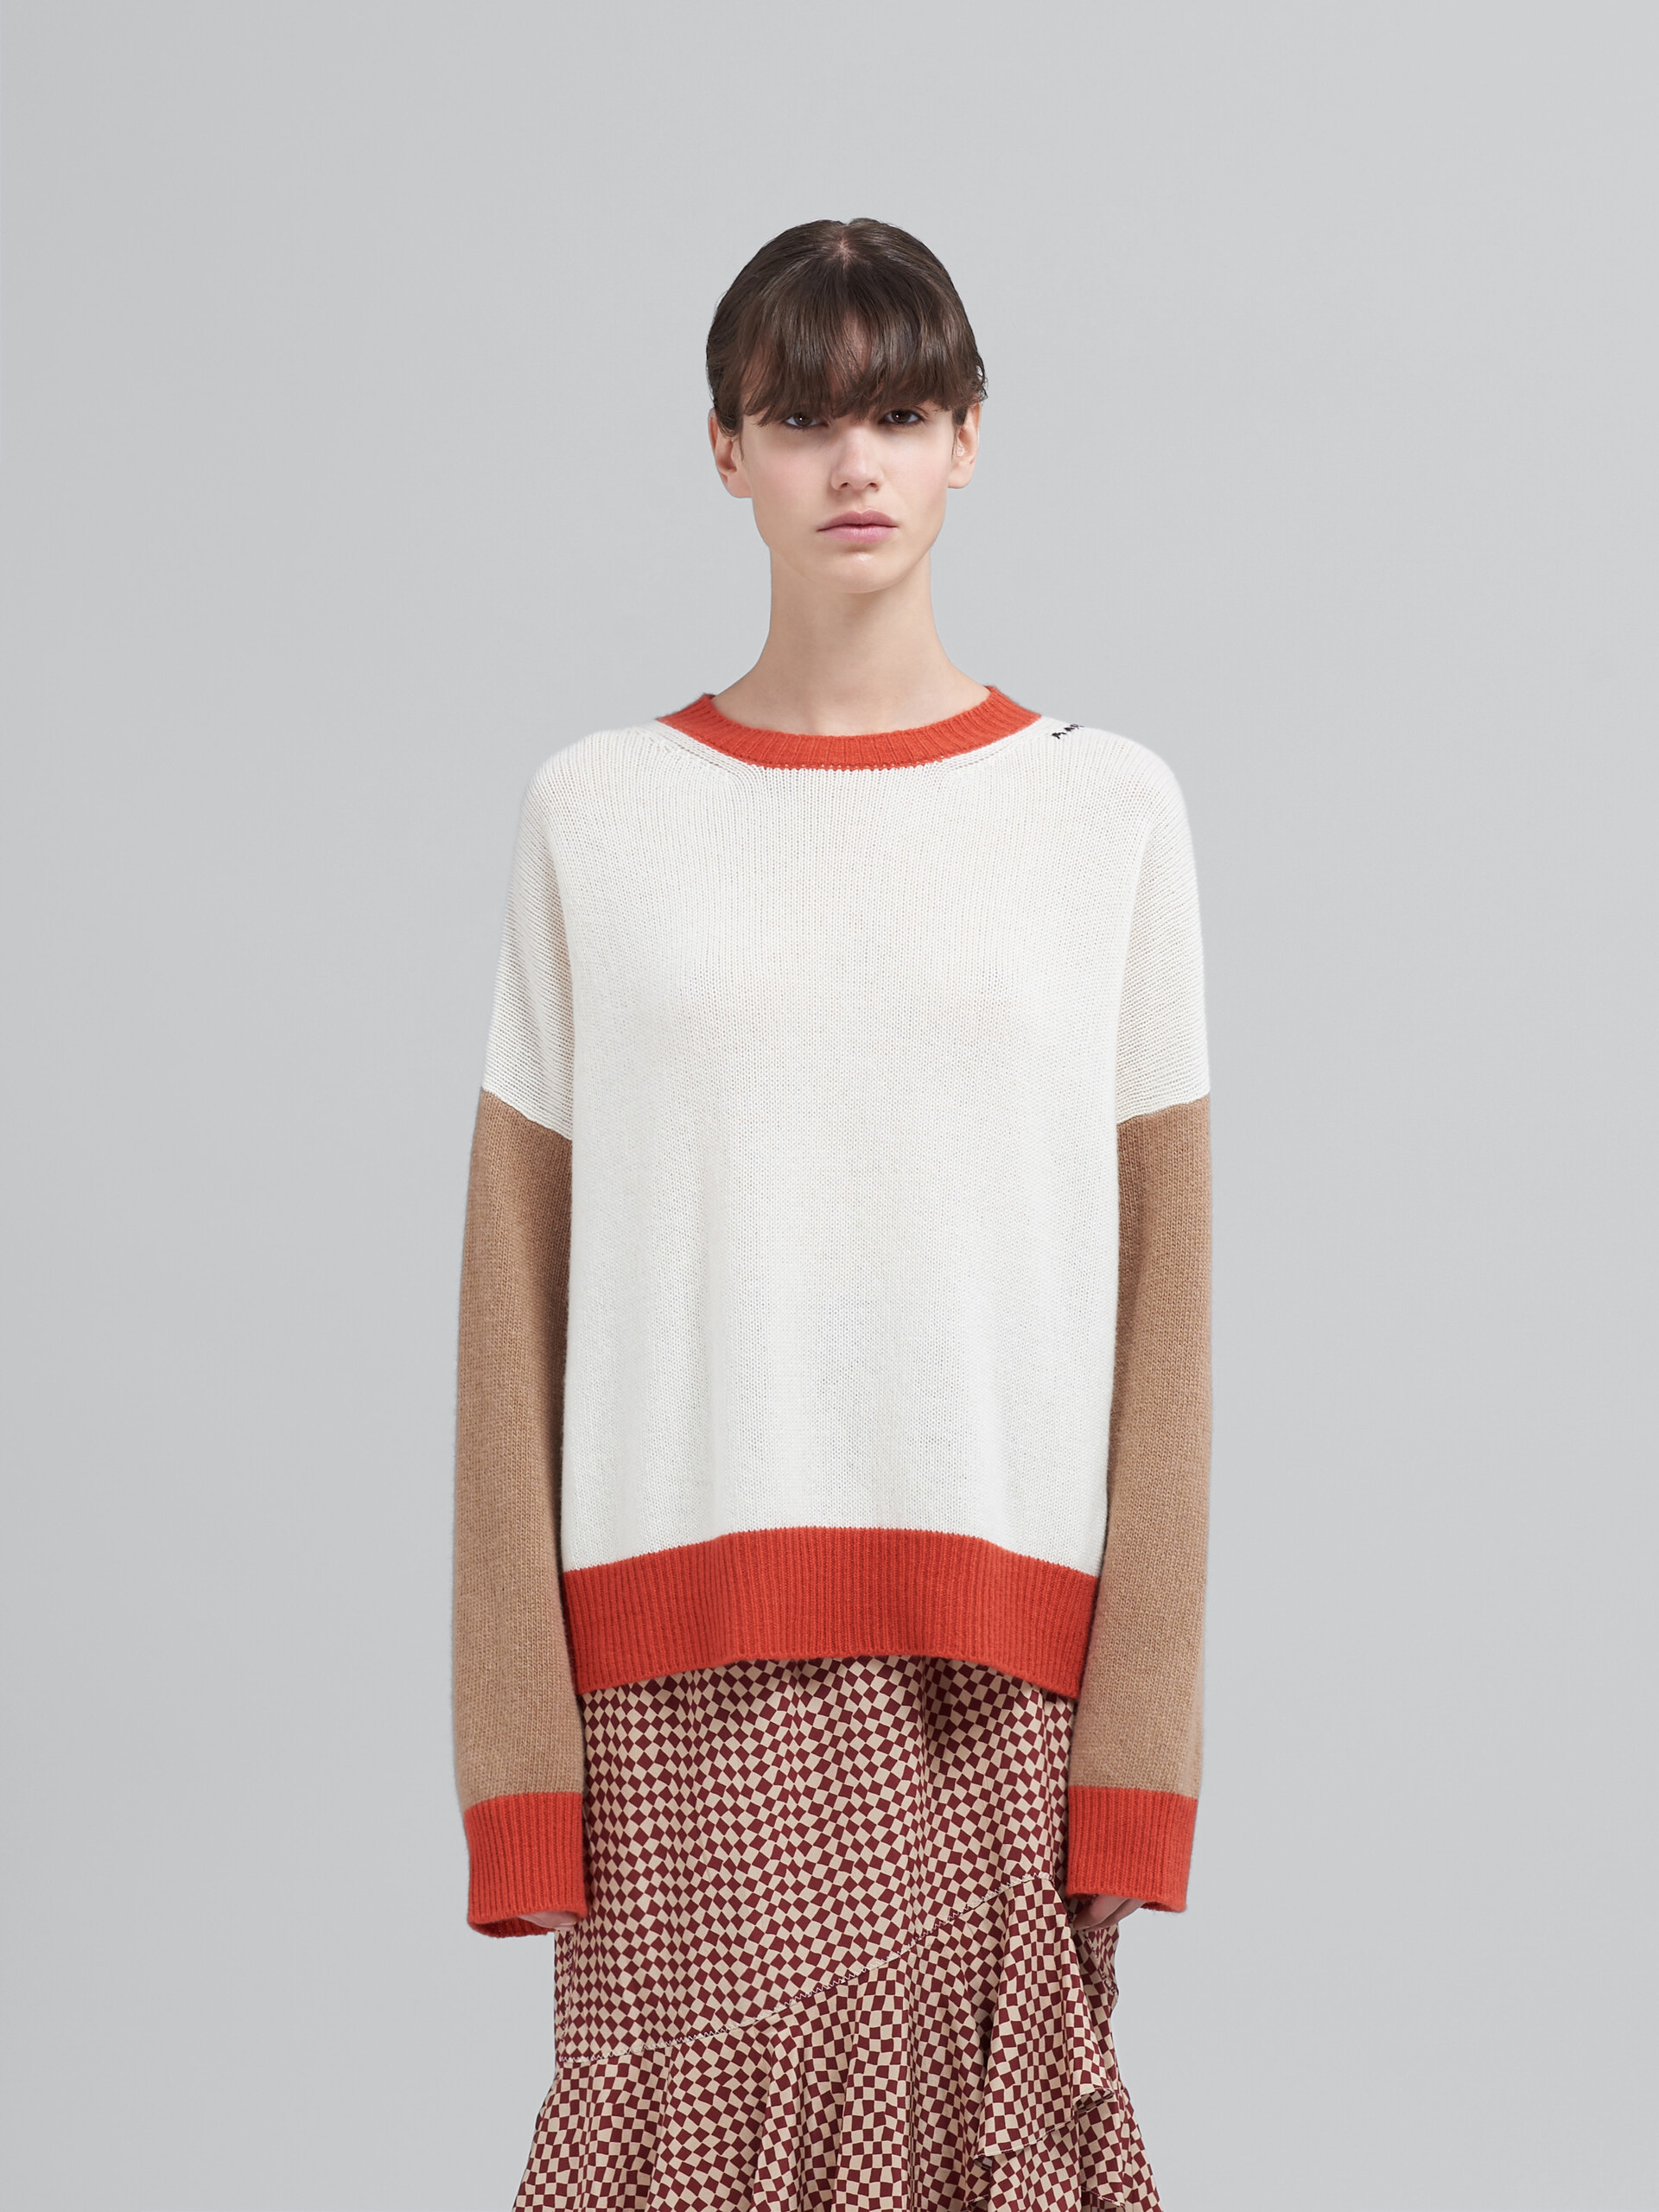 Iconic cashmere sweater - Pullovers - Image 2